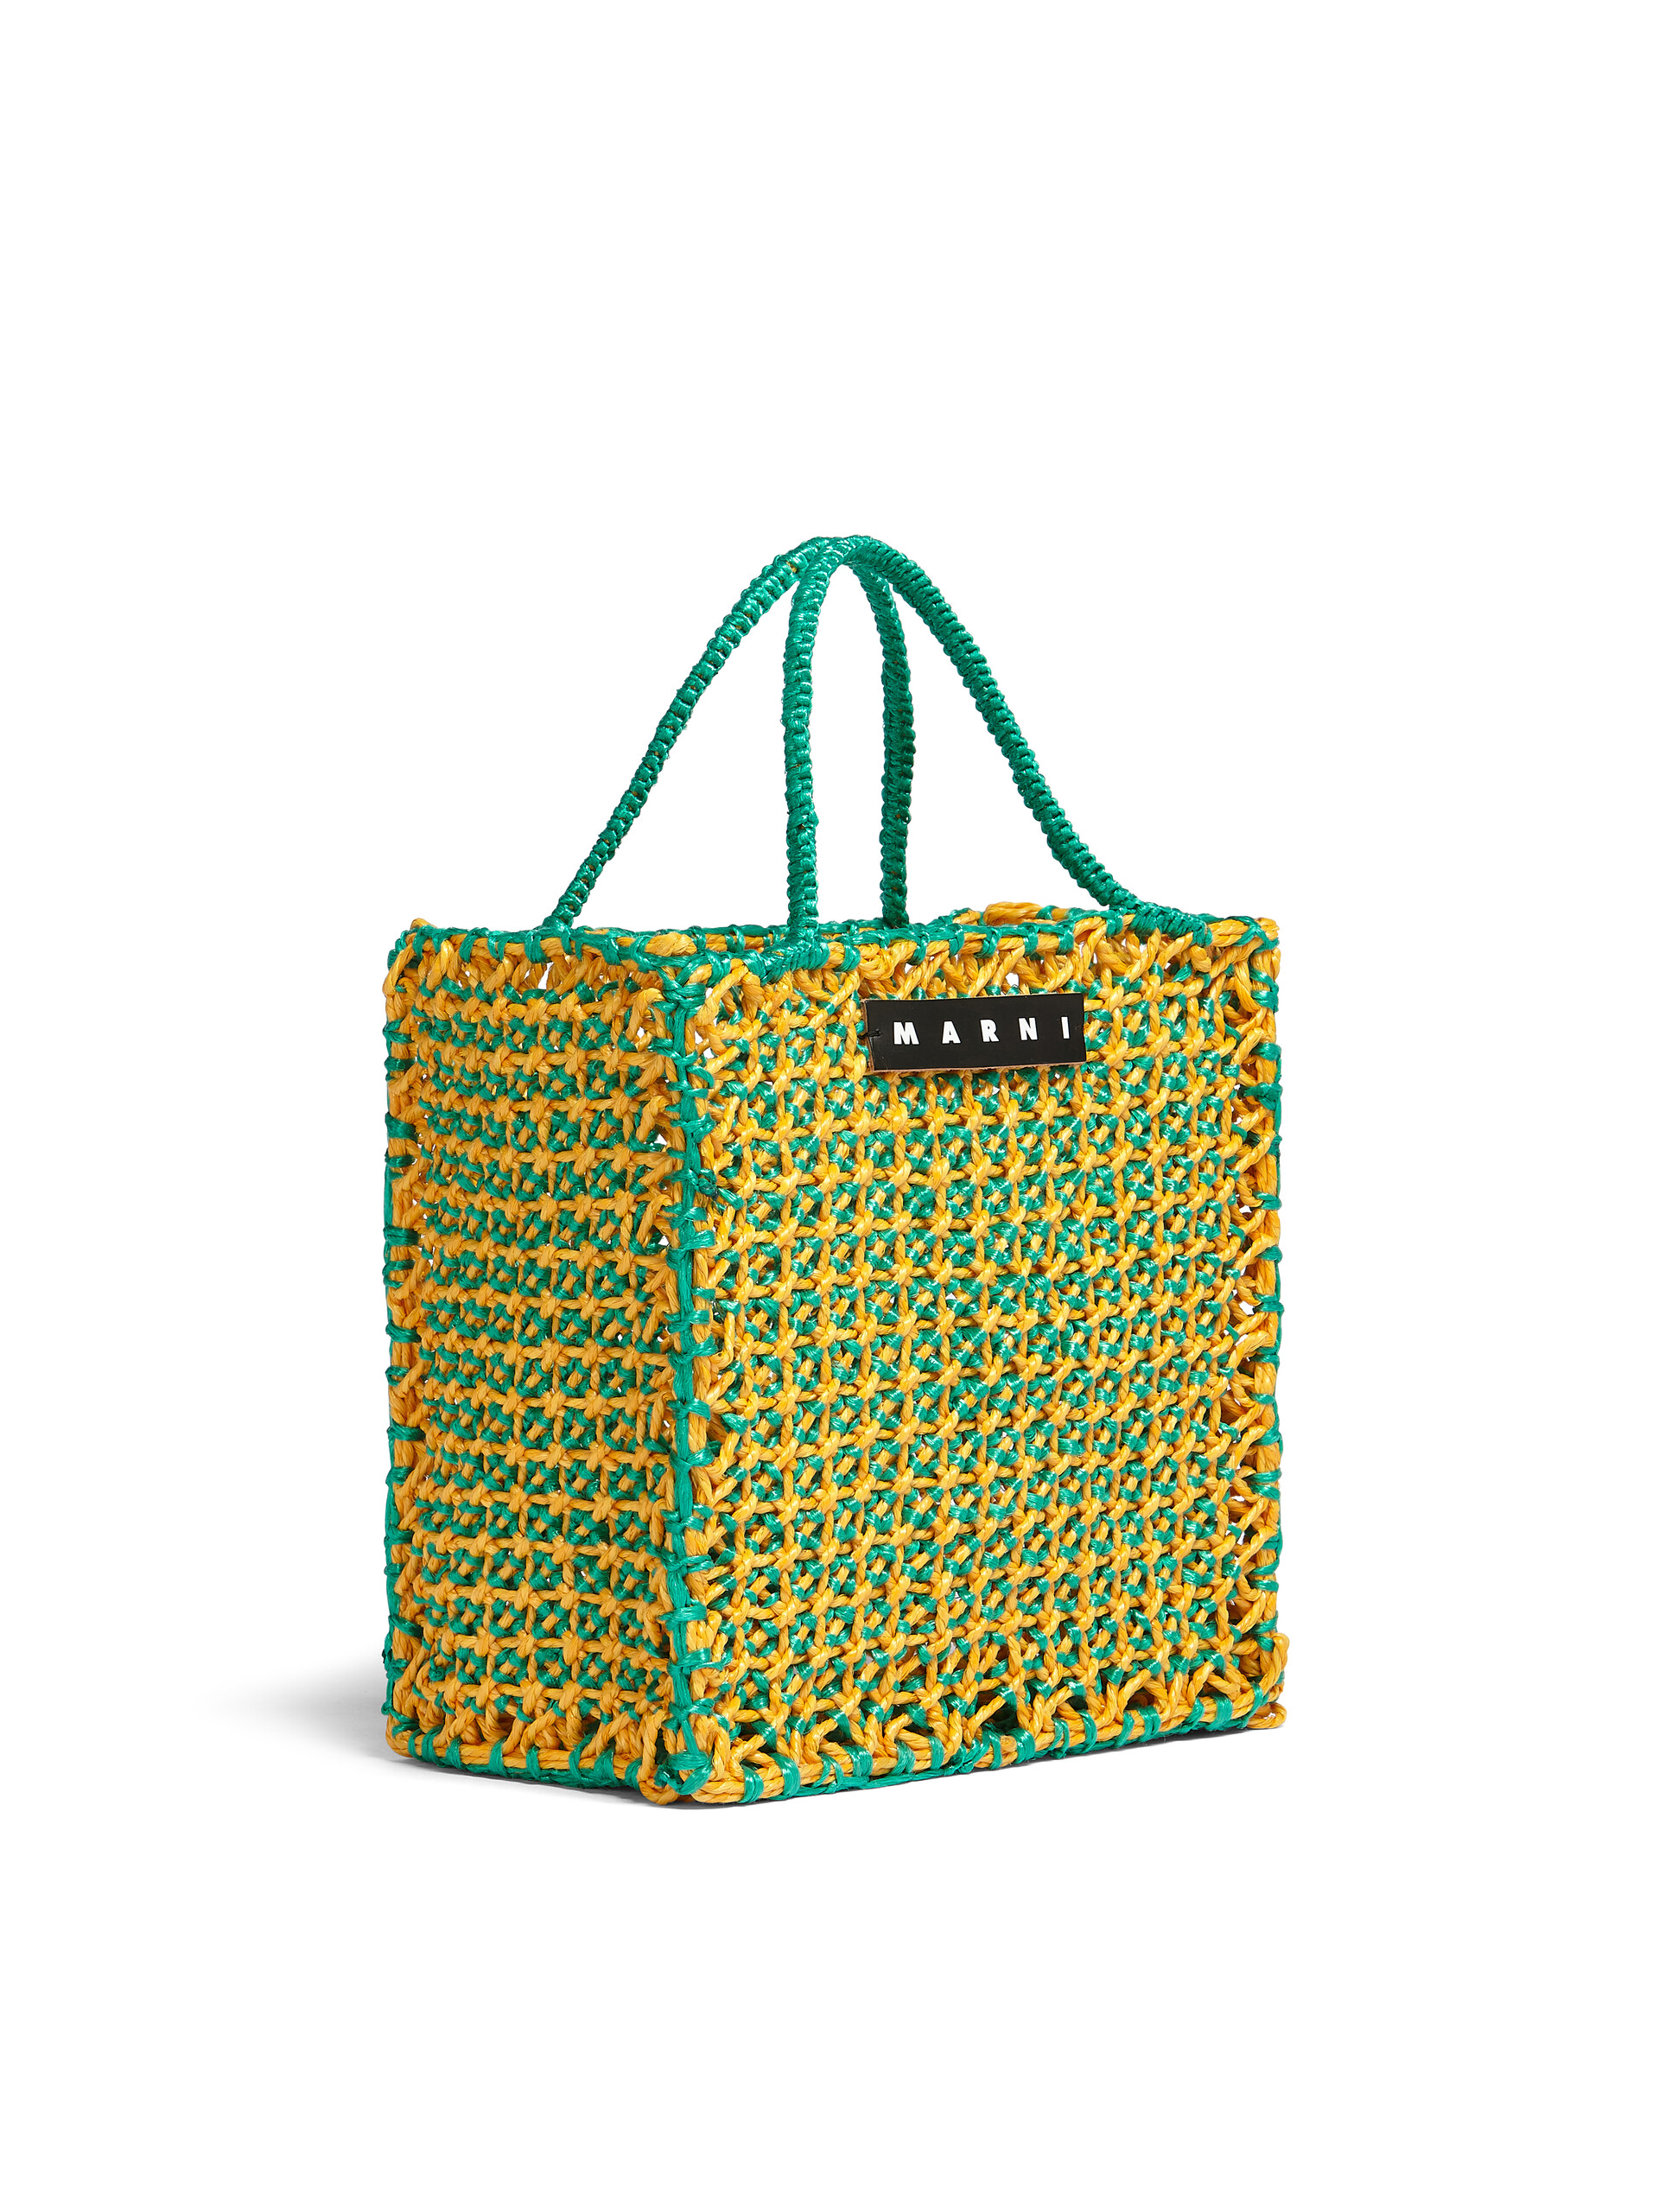 MARNI MARKET large bag in green and yellow crochet - Bags - Image 2